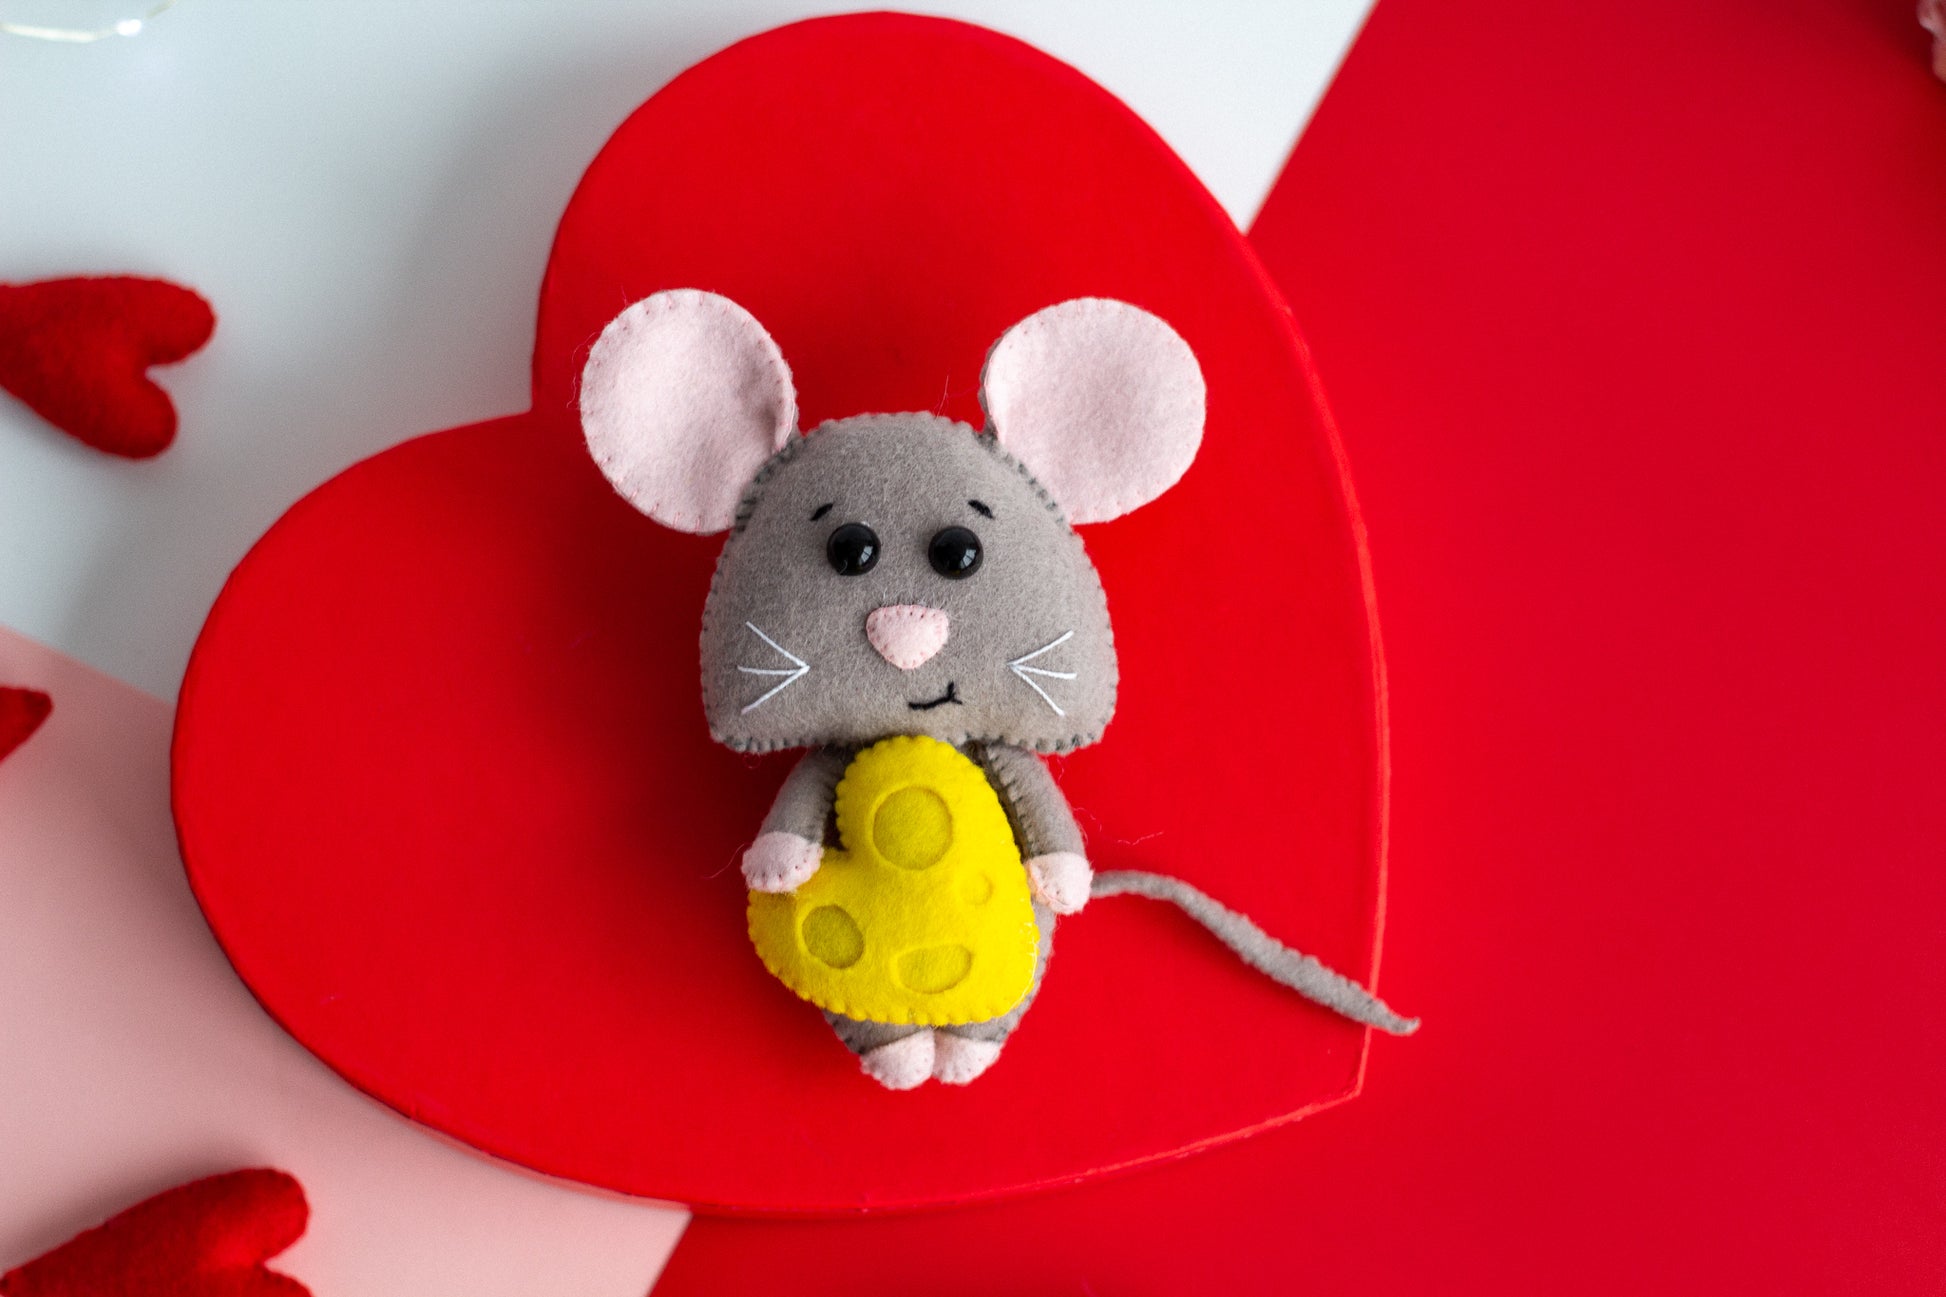 Mouse with a heart Valentines day gift